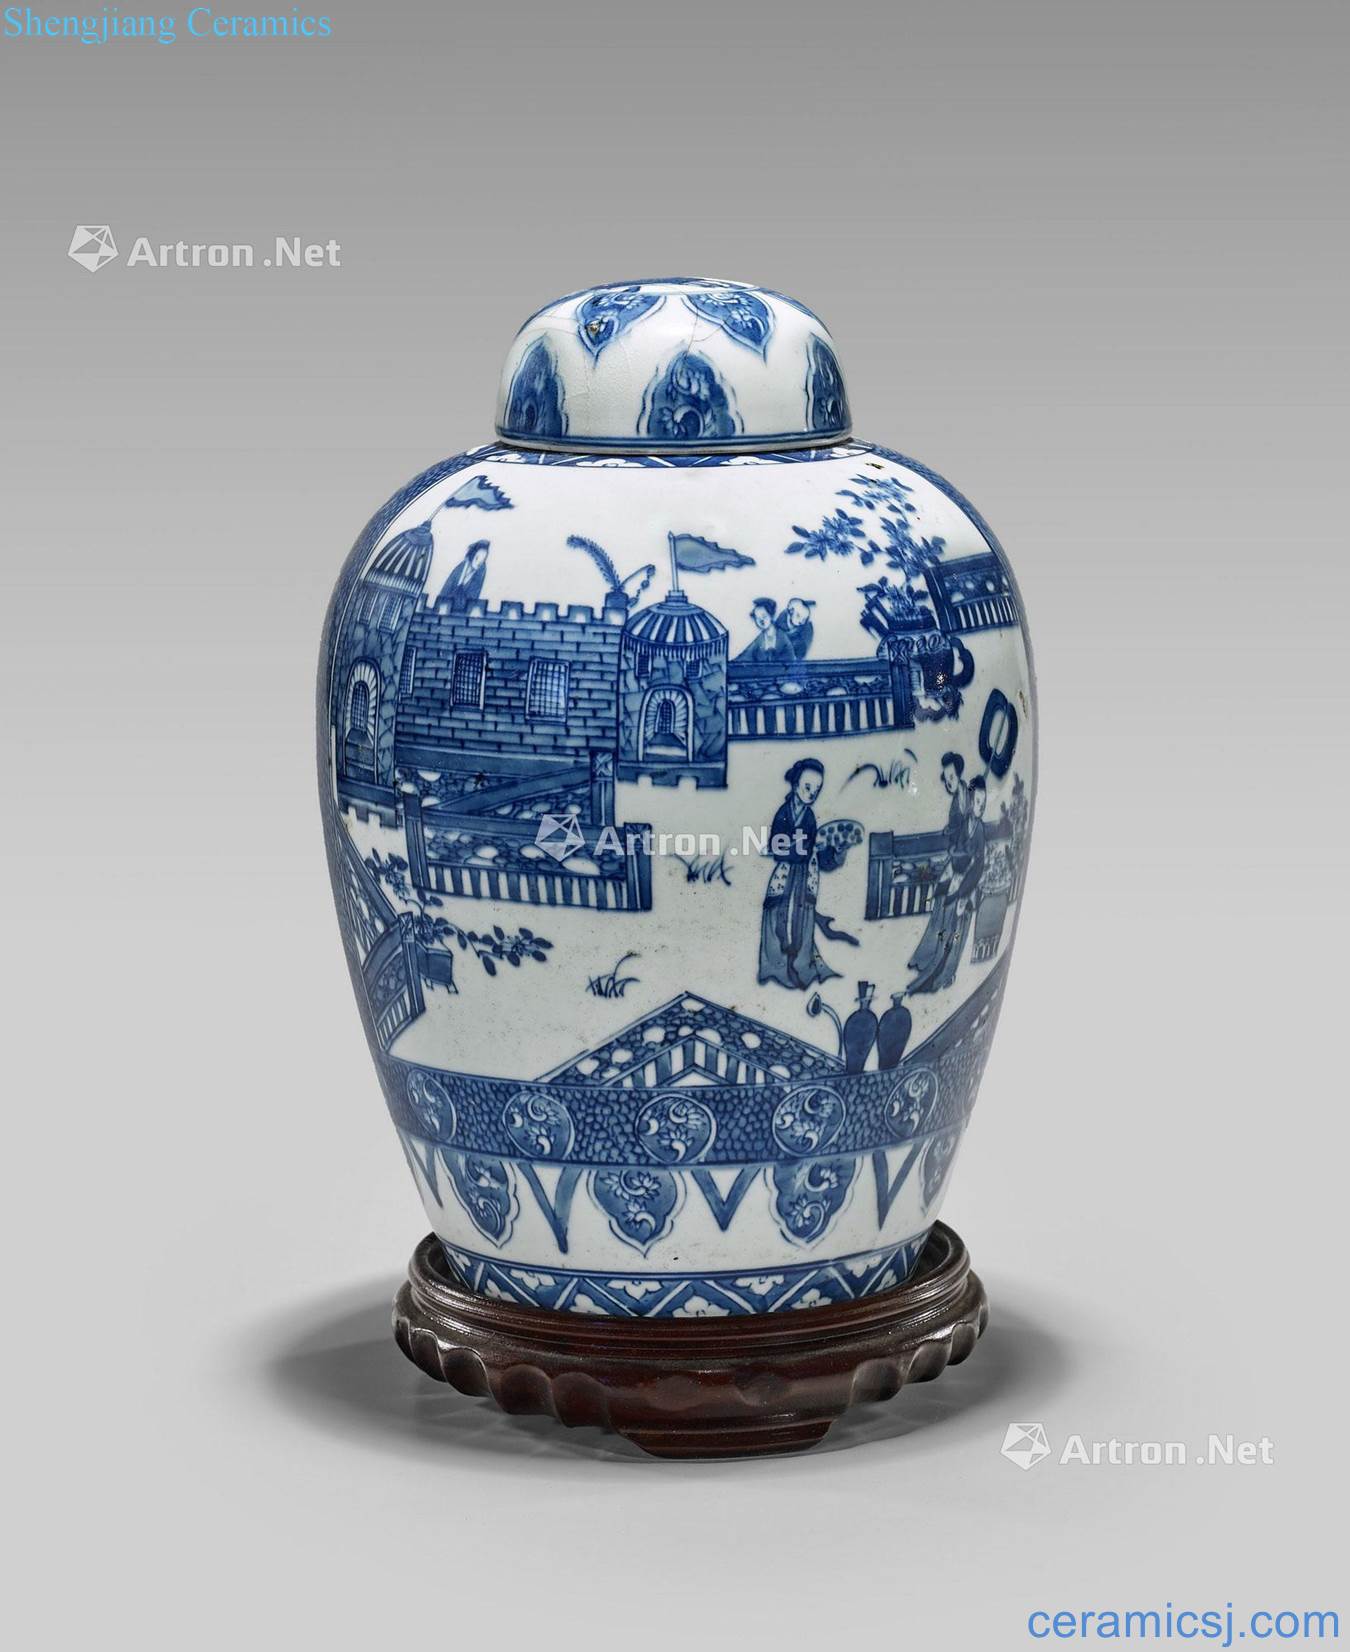 In the 19th century or earlier The antique blue and white porcelain bottle cap